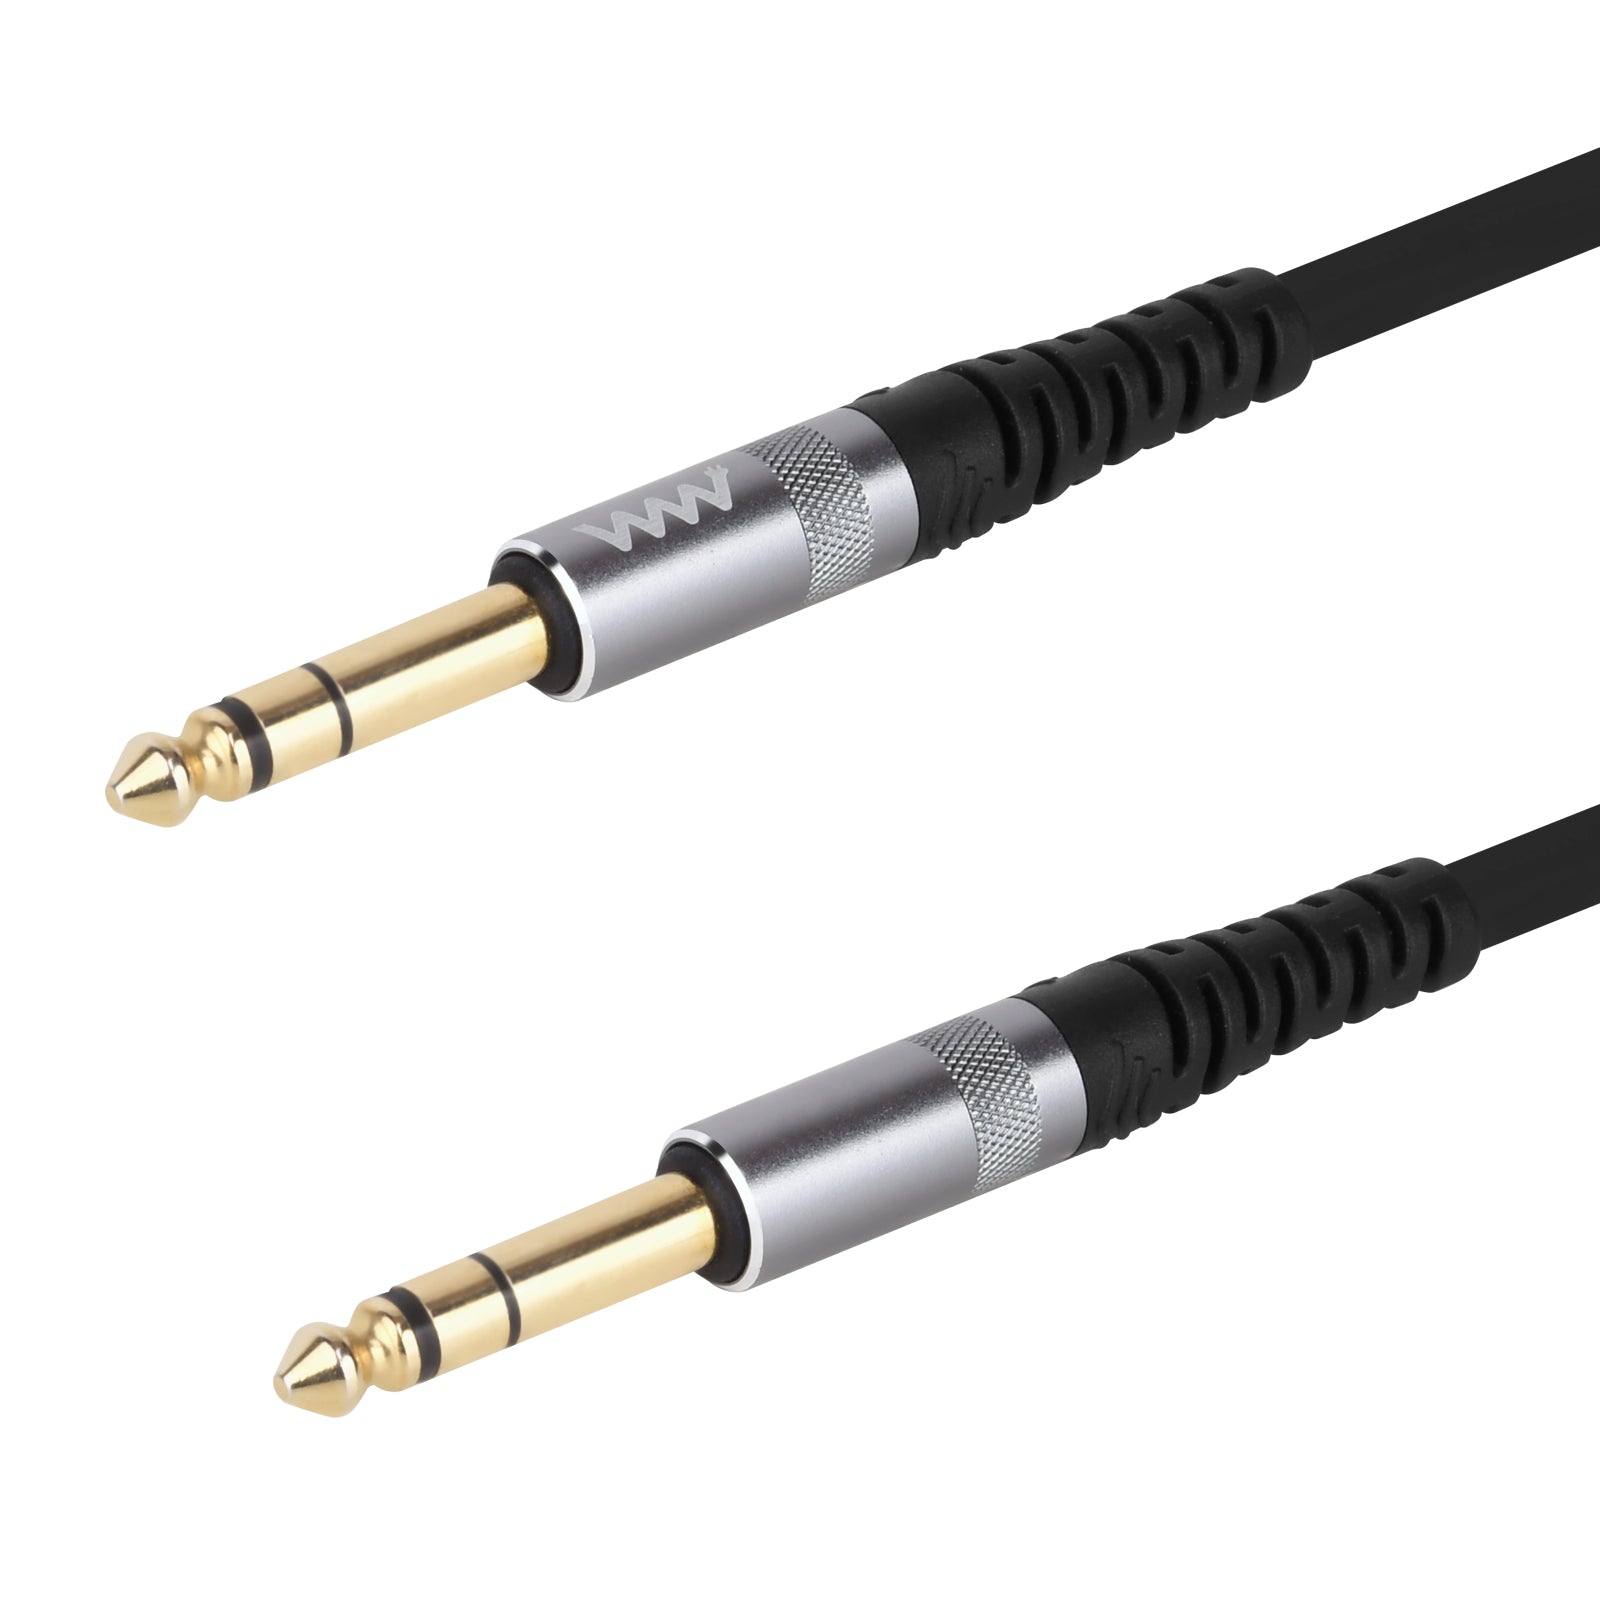 6.35mm 1/4 inch Male to Male TRS Stereo Professional Audio Cable 1m